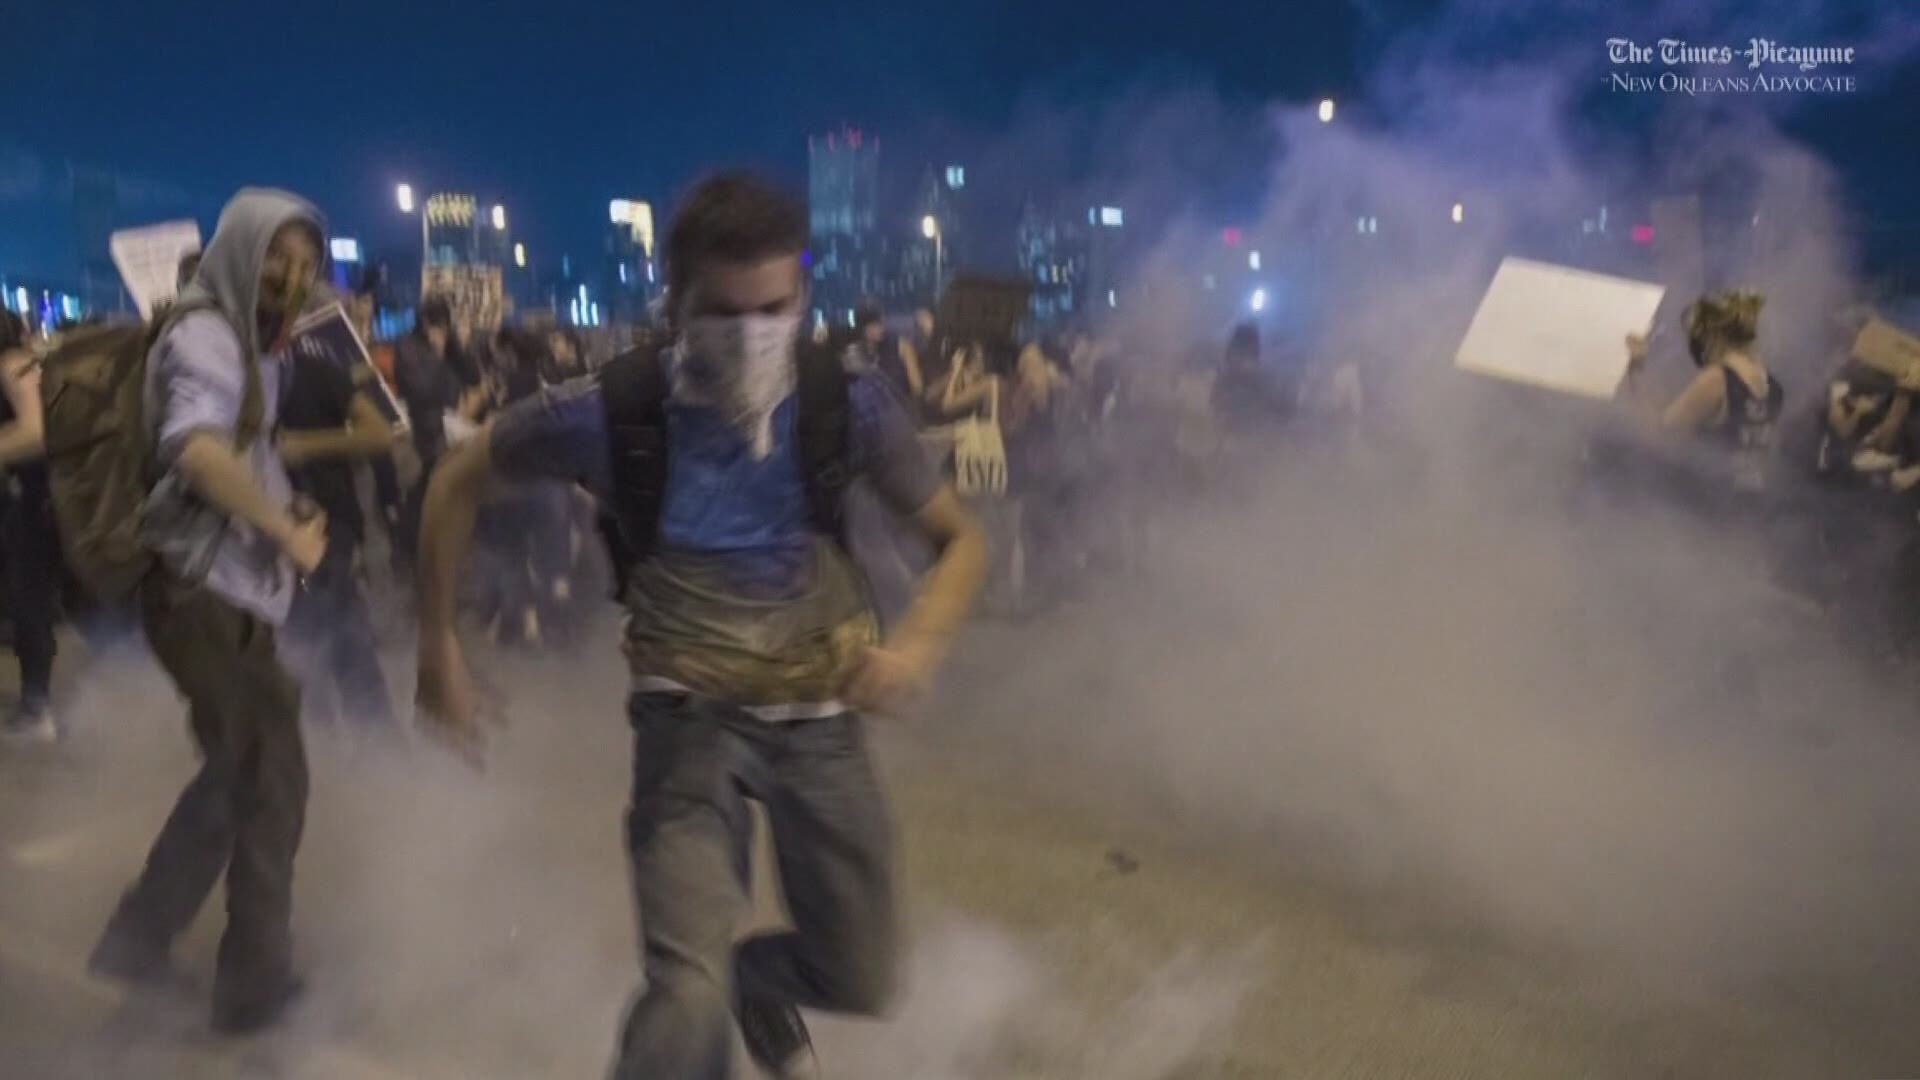 A suit has been filed against the NOPD for its use of tear gas at protestors on the Crescent City Connection last summer during civil rights protests.